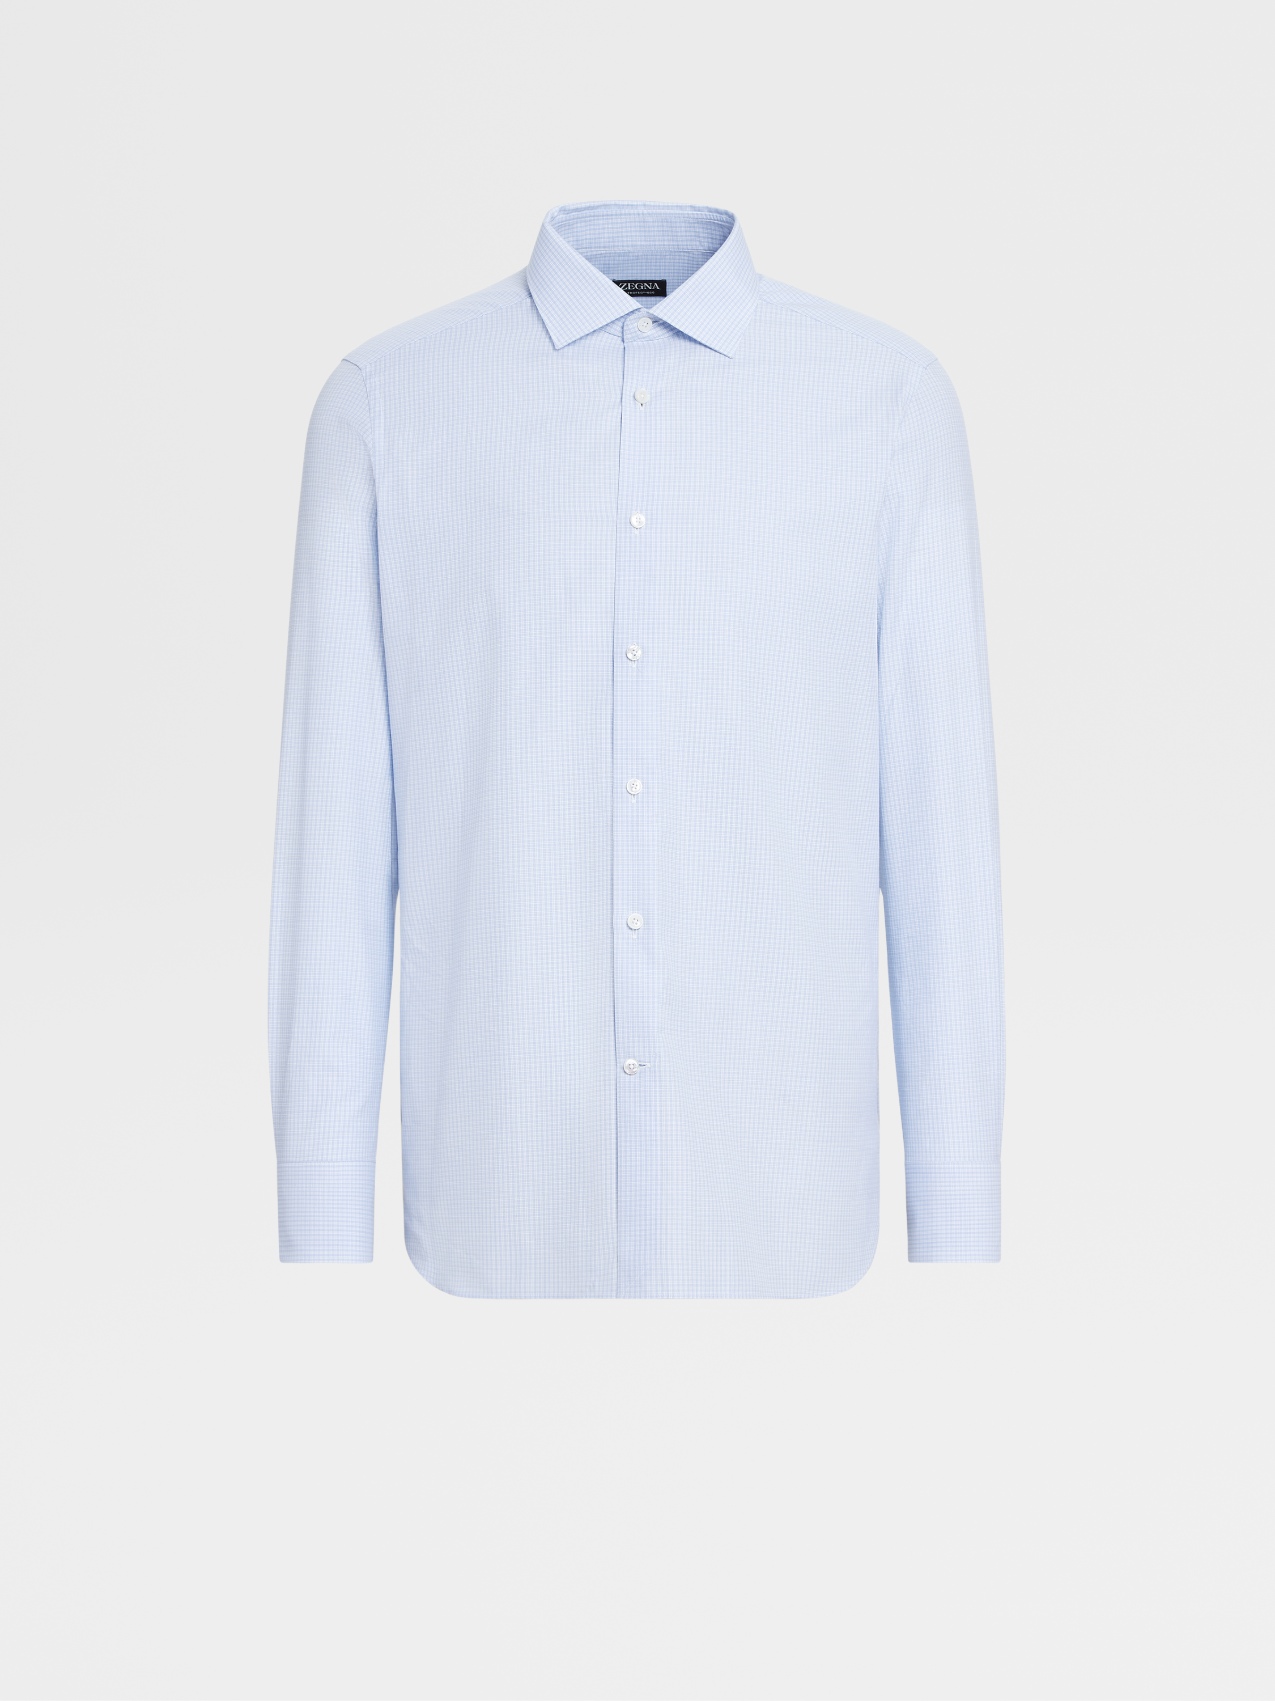 White and Light Blue Trofeo™ 600 Cotton and Silk Long-sleeve Tailoring Shirt